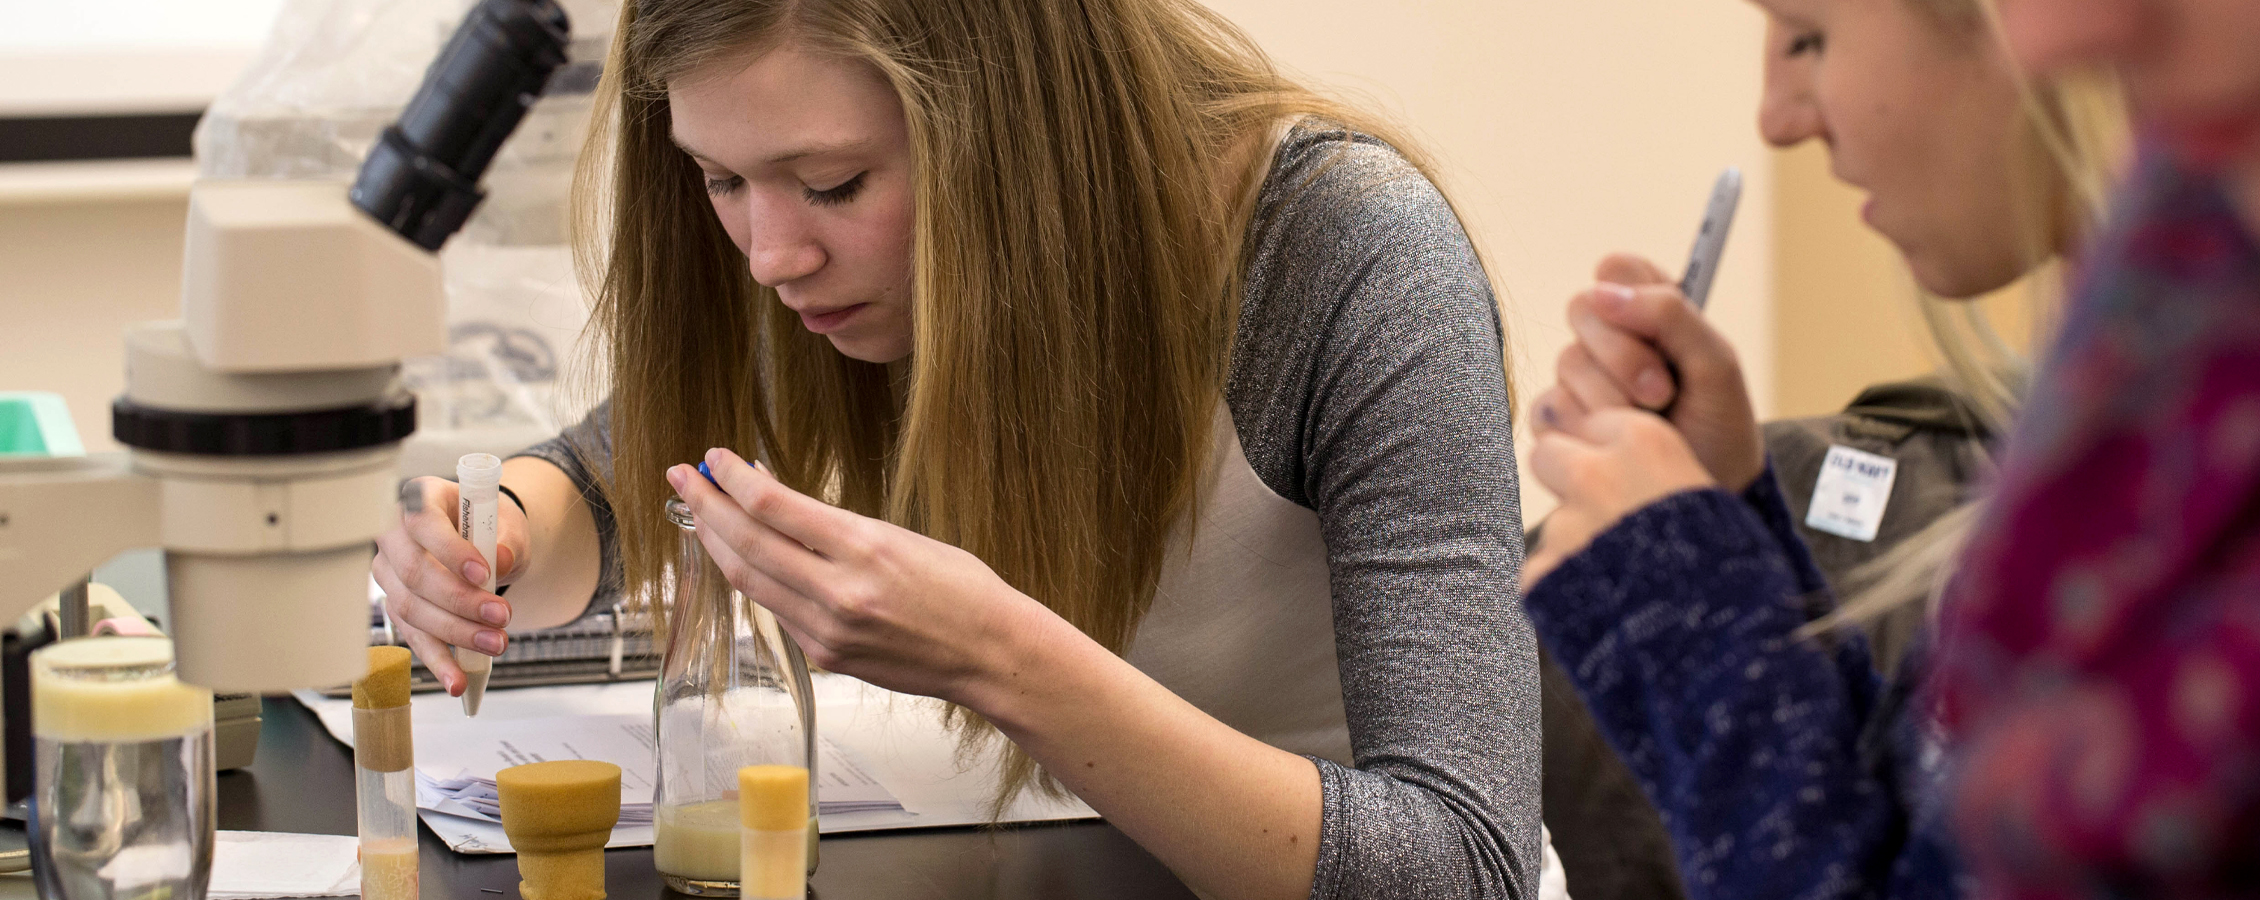 A student inspects something in a vial next to a microscope.